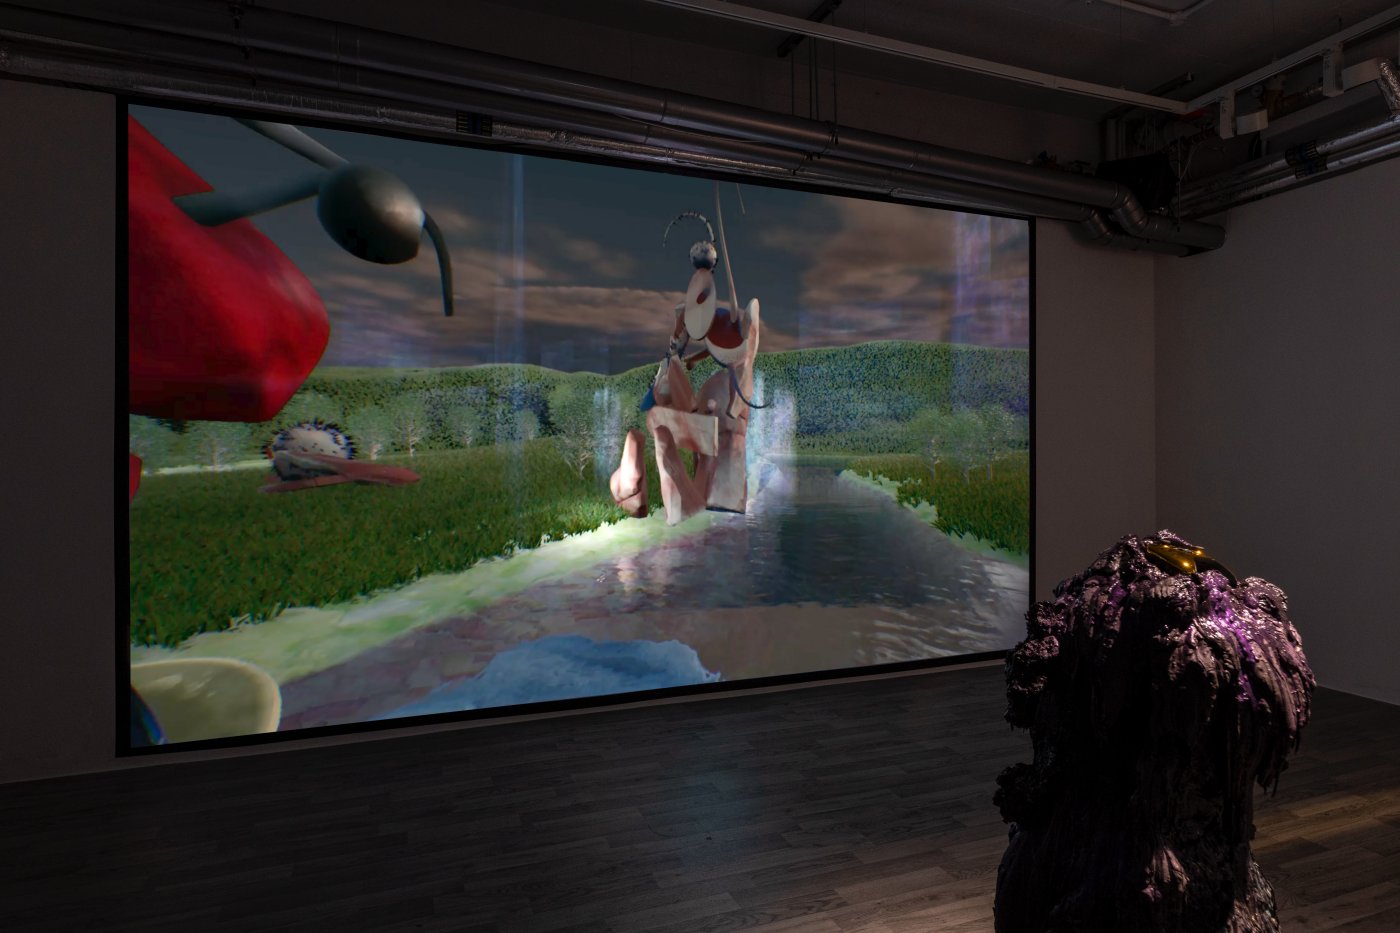 Installation image for Libby Heaney: Ent-er the Garden of Forking Path, at Gazelli Art House